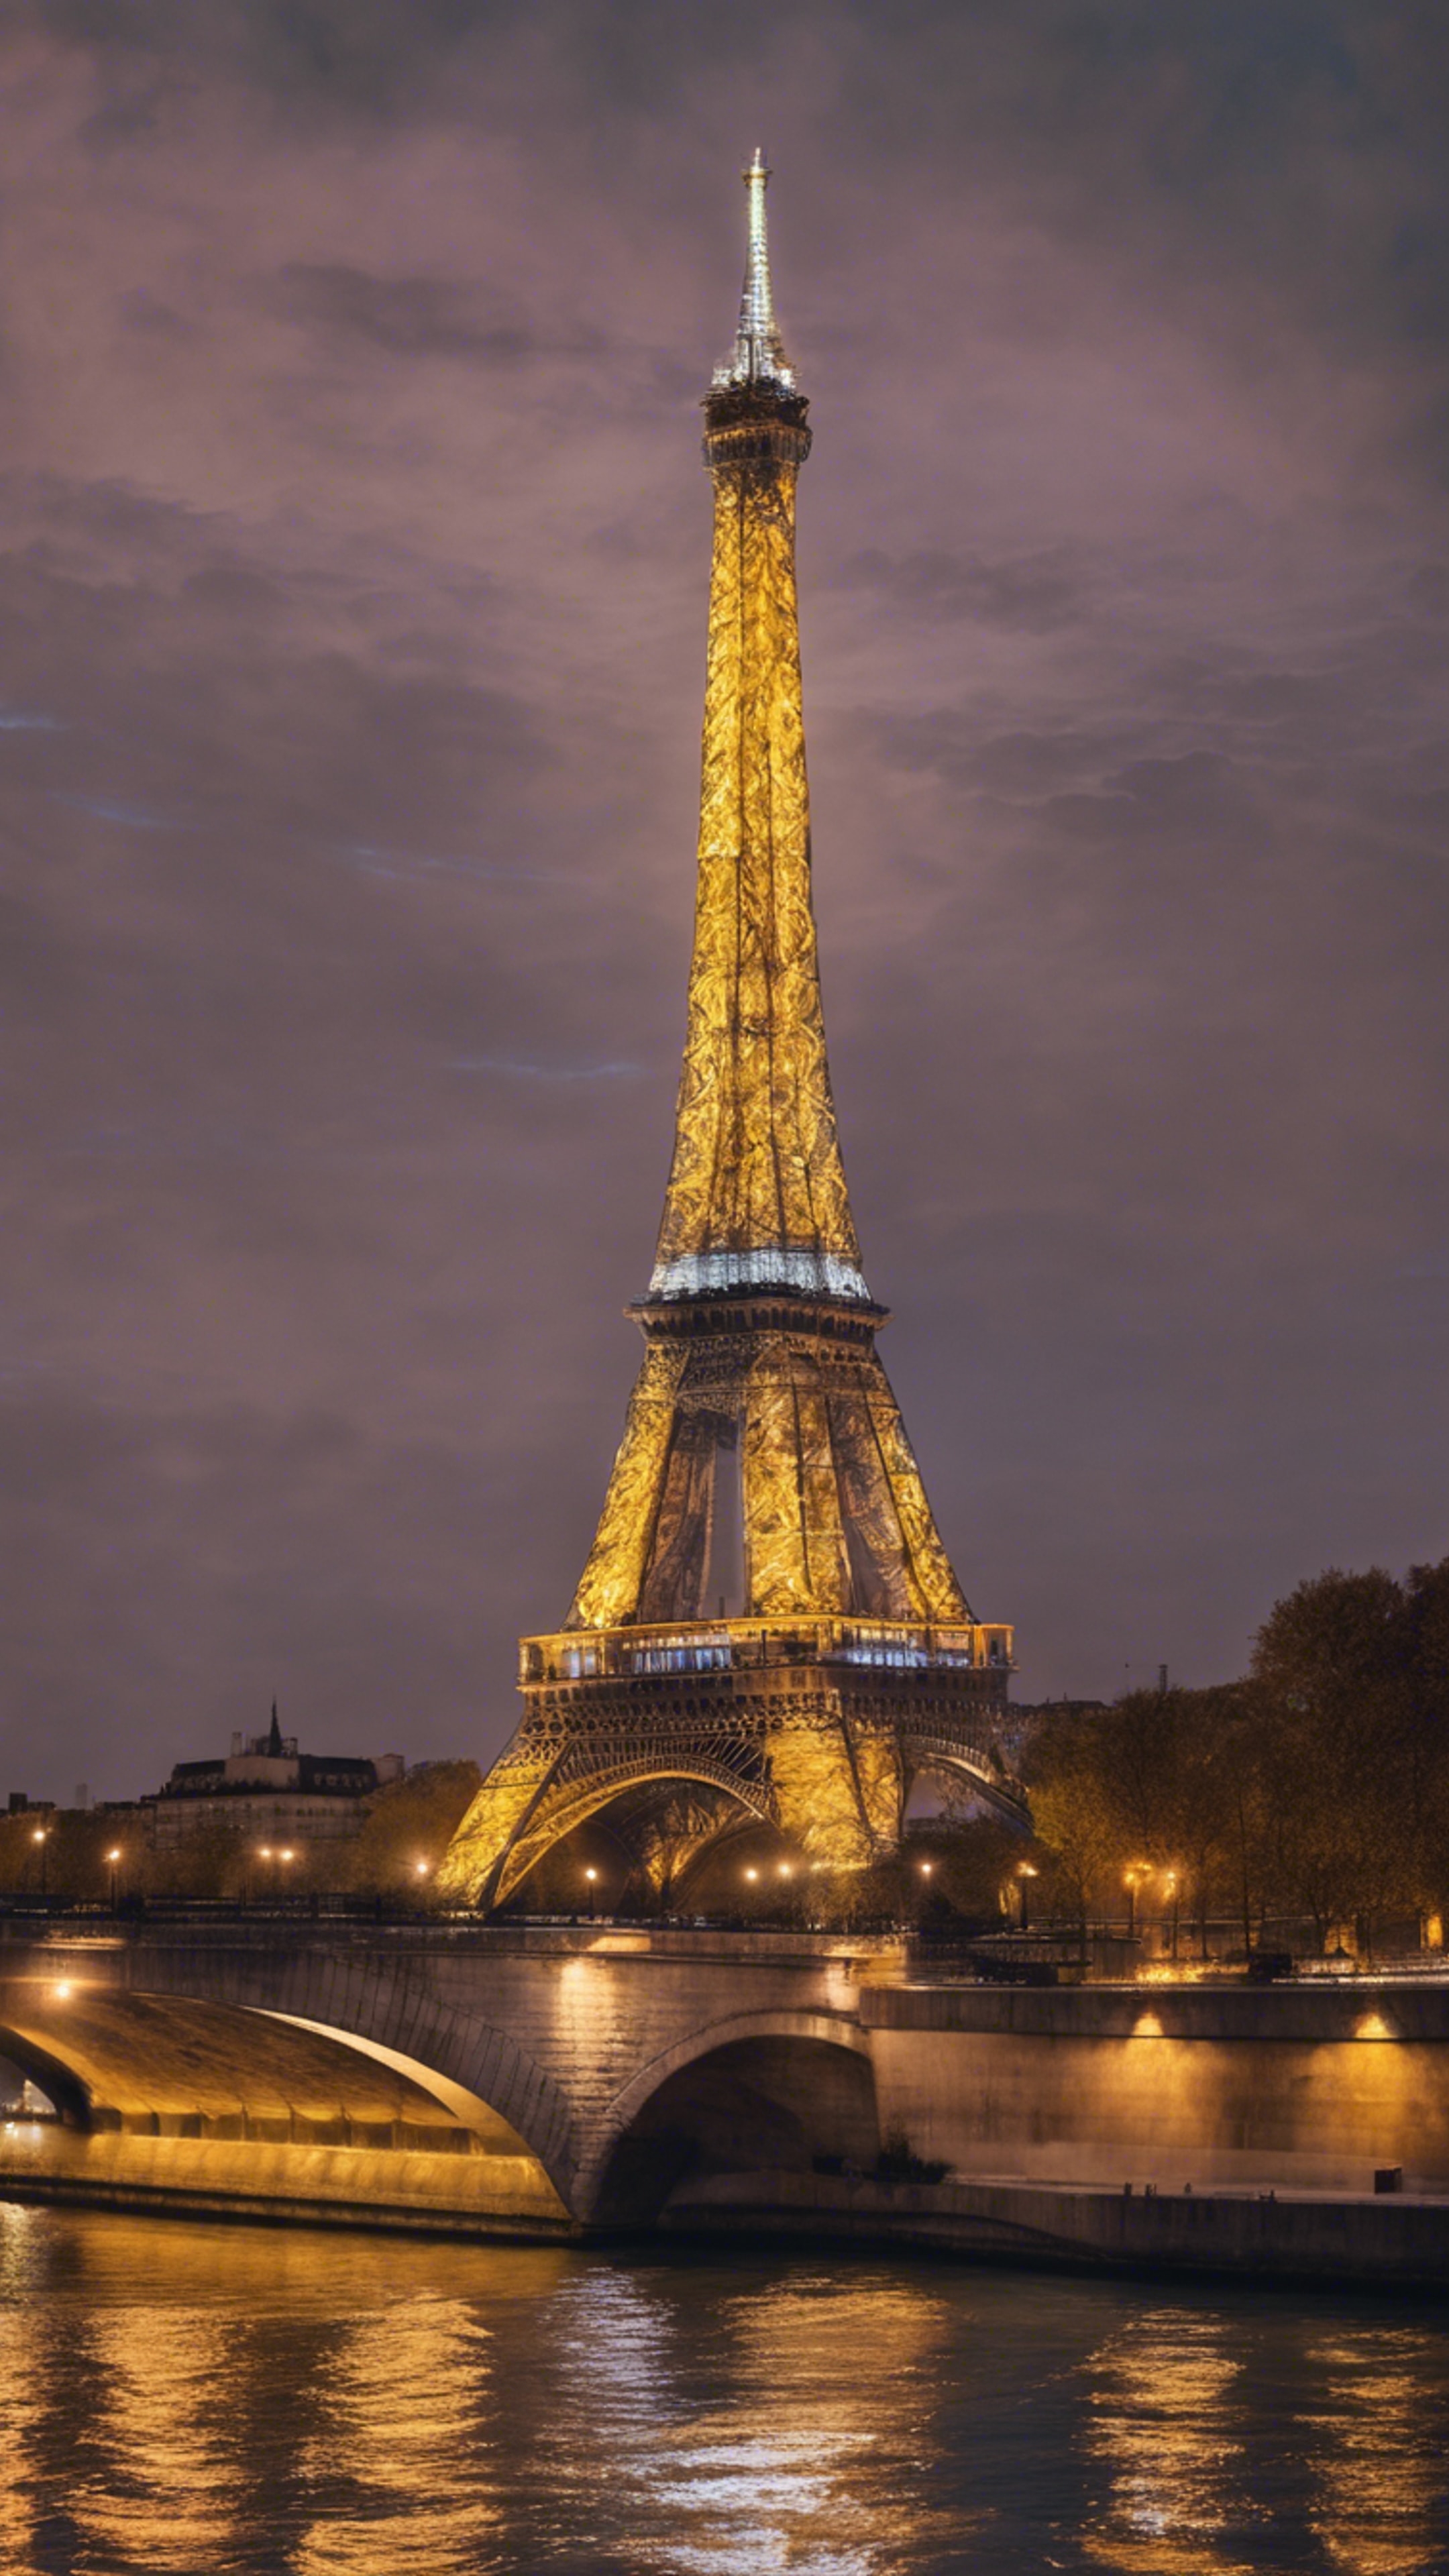 Eiffel tower illuminated against the Paris skyline at night, reflecting in the smooth waters of the river Seine. Tapet[bfd7e83086d14adeb14c]